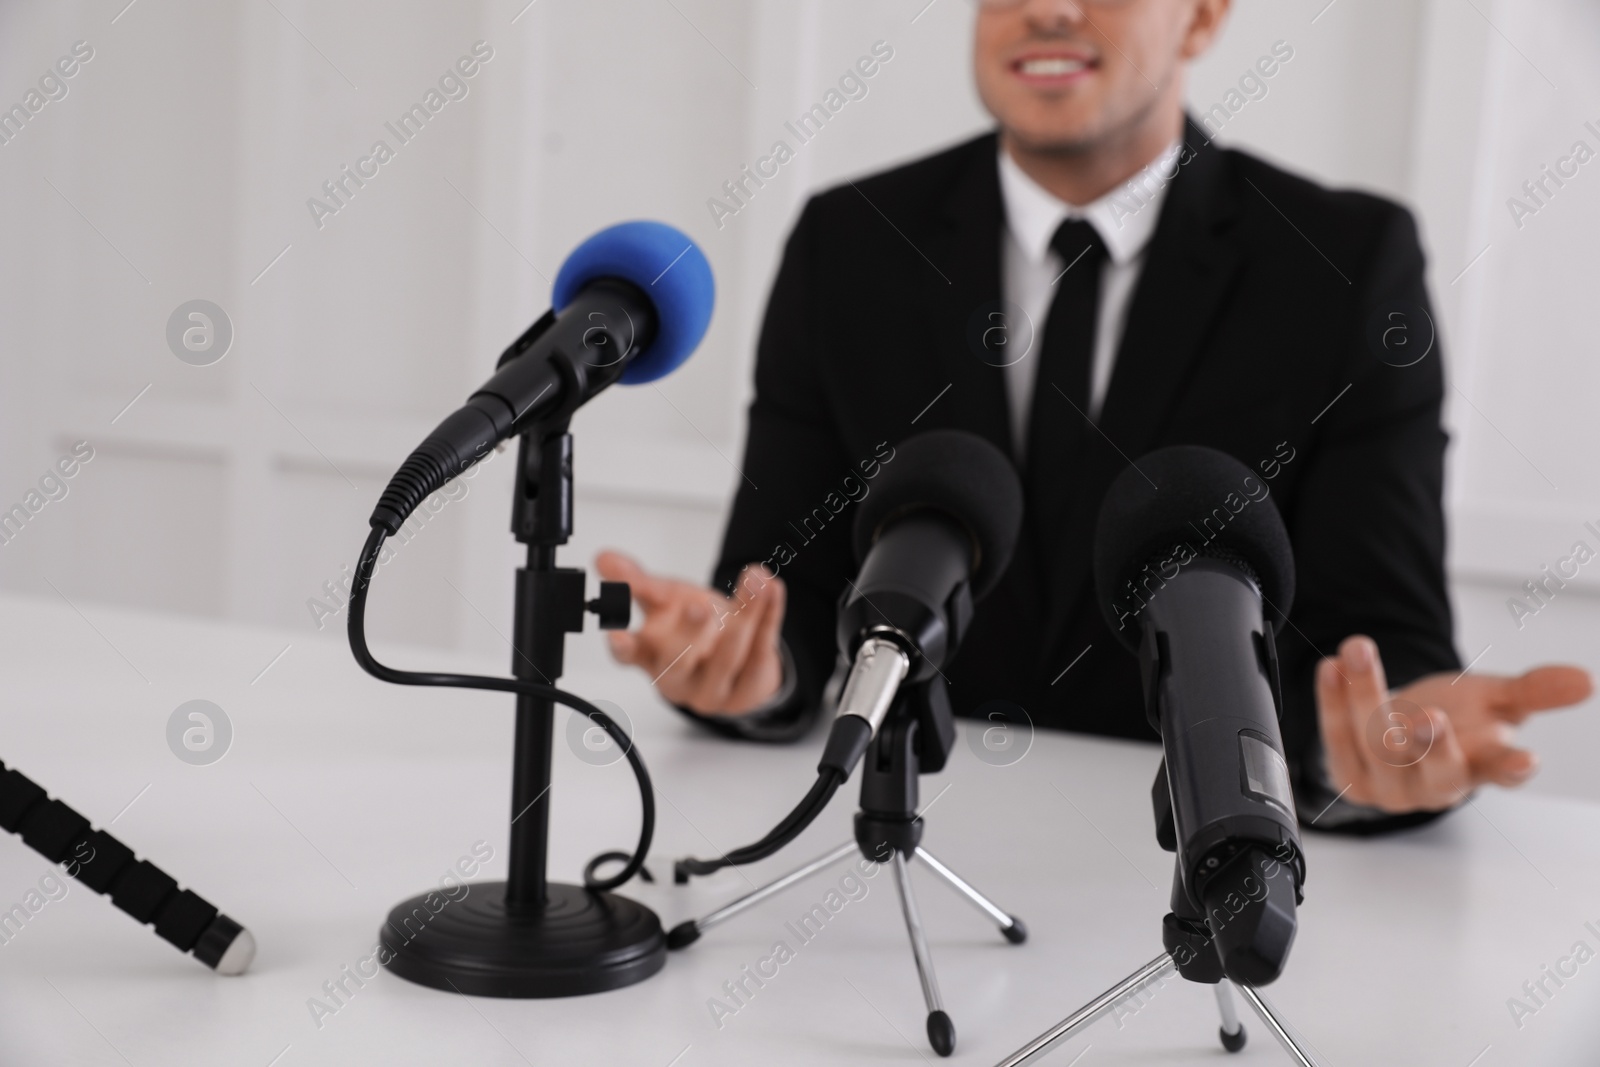 Photo of Business man giving interview at official event, closeup